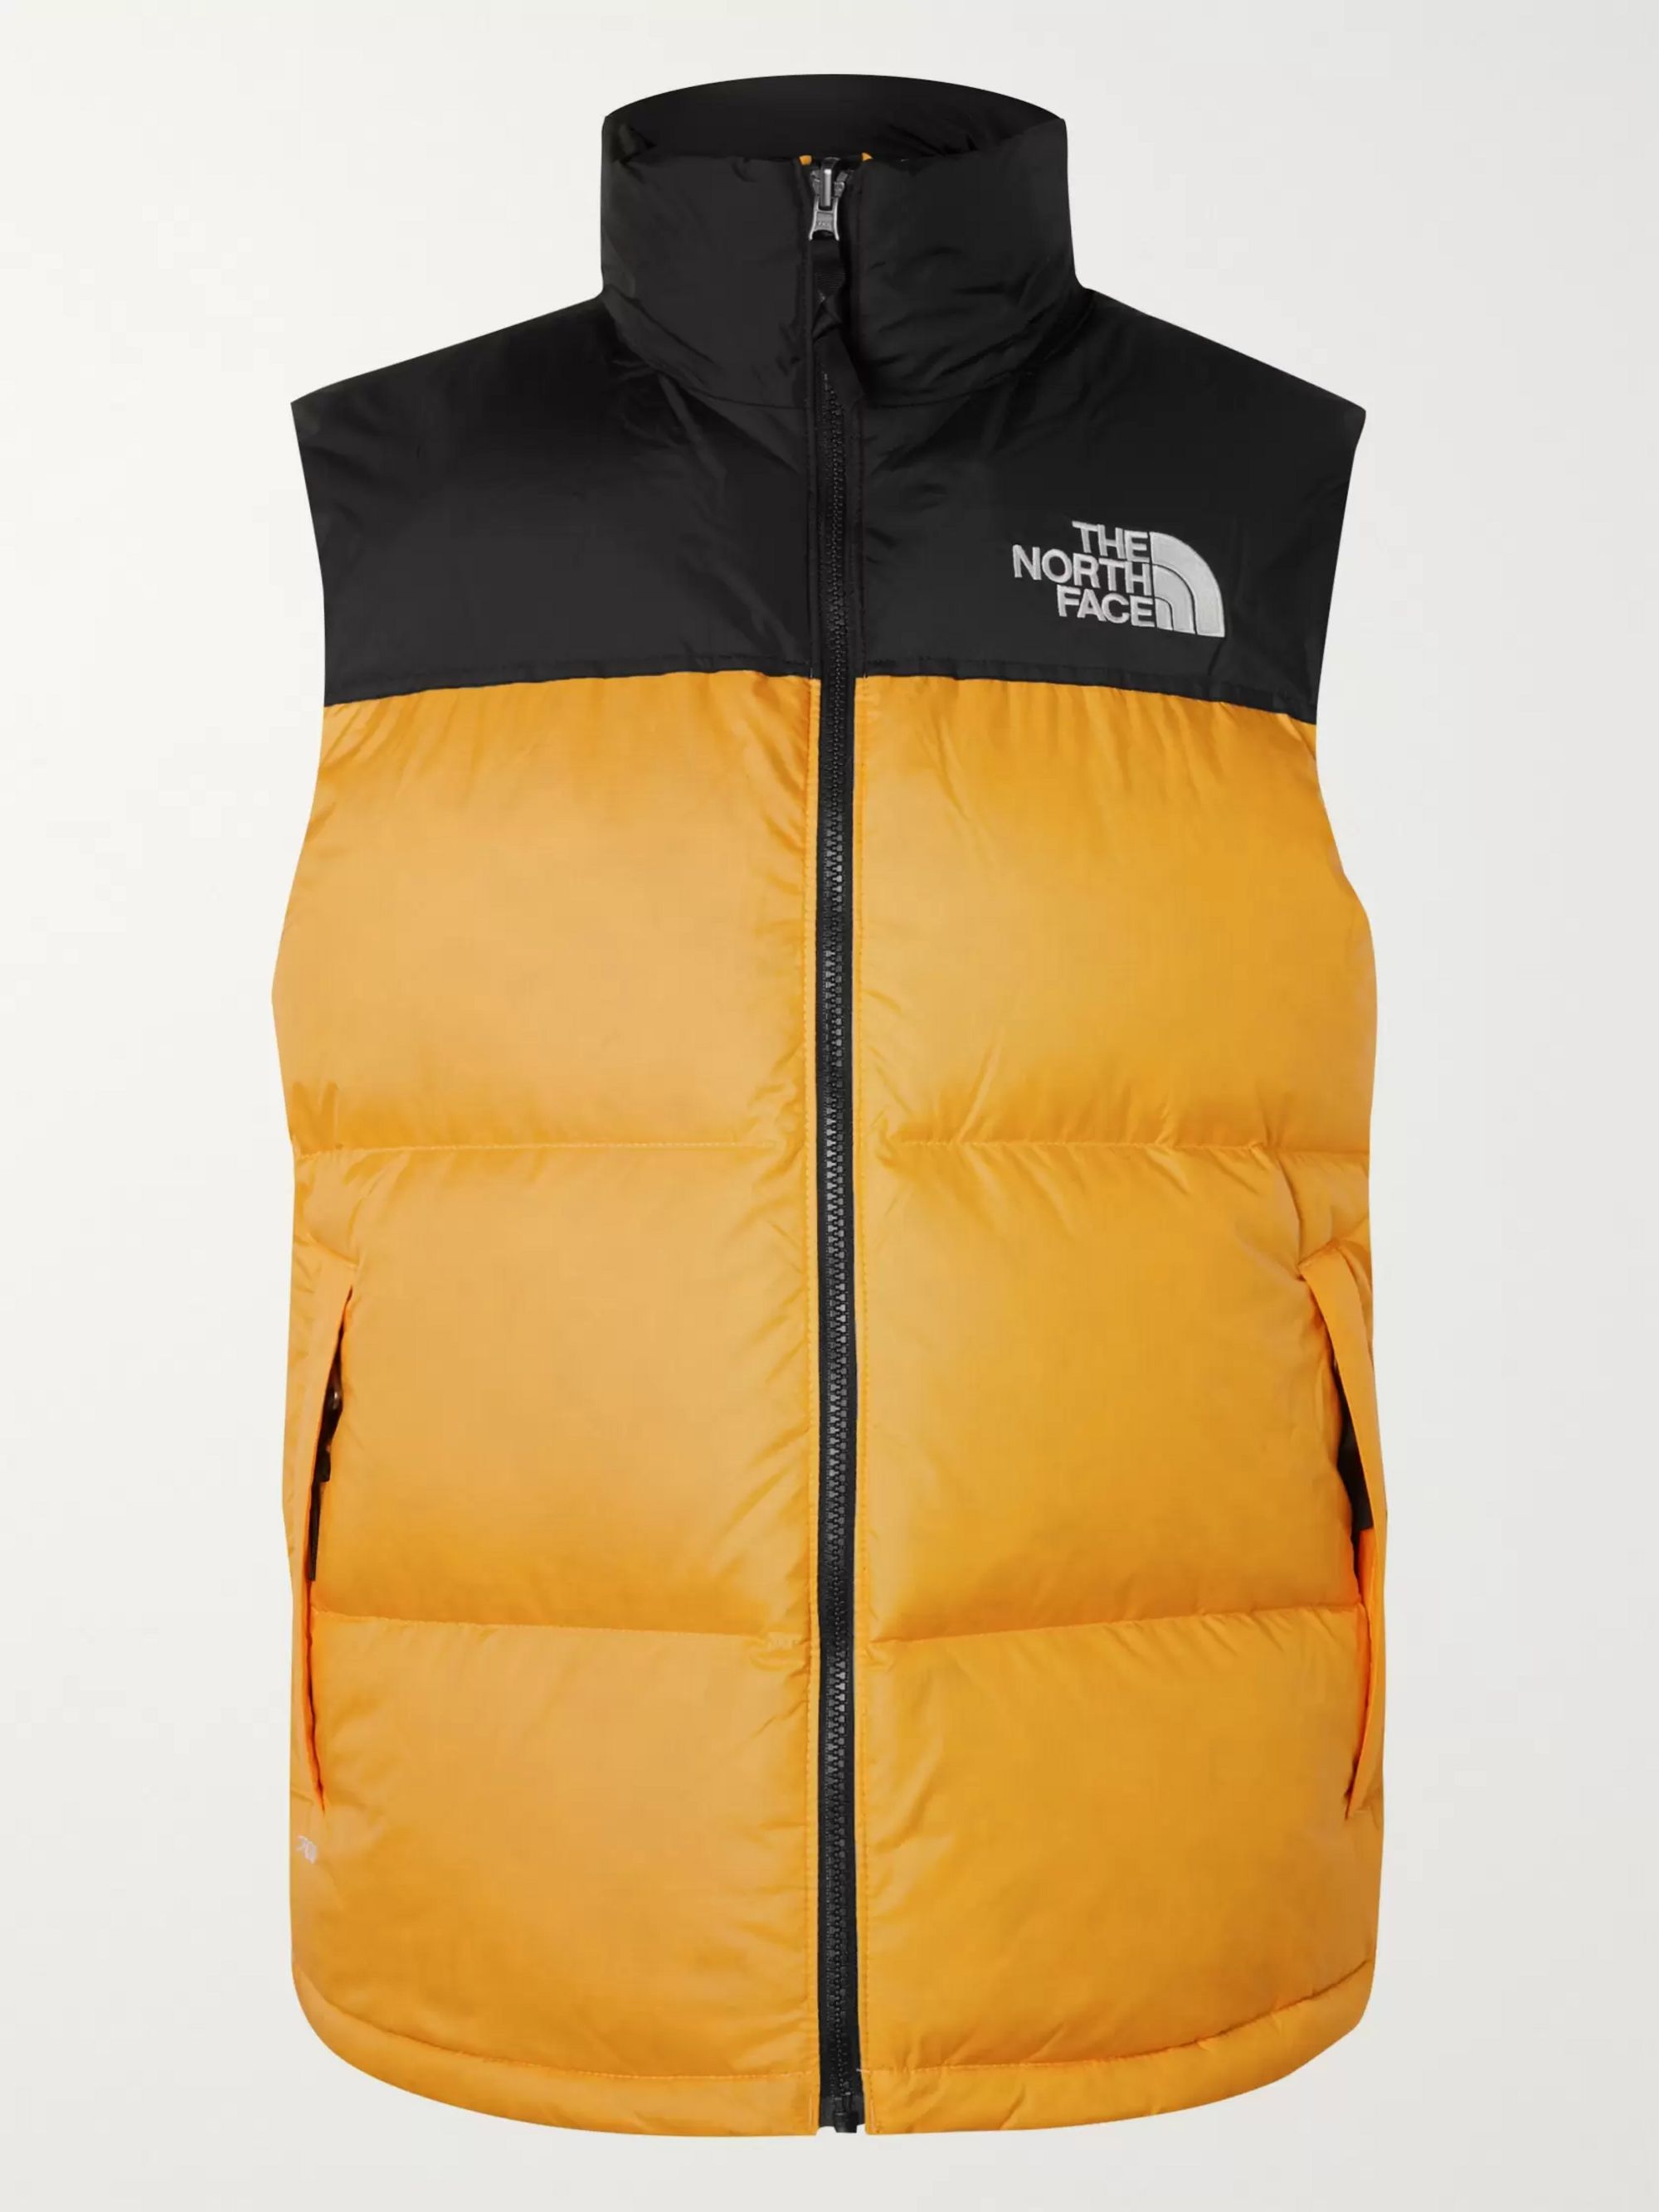 north face gilet yellow